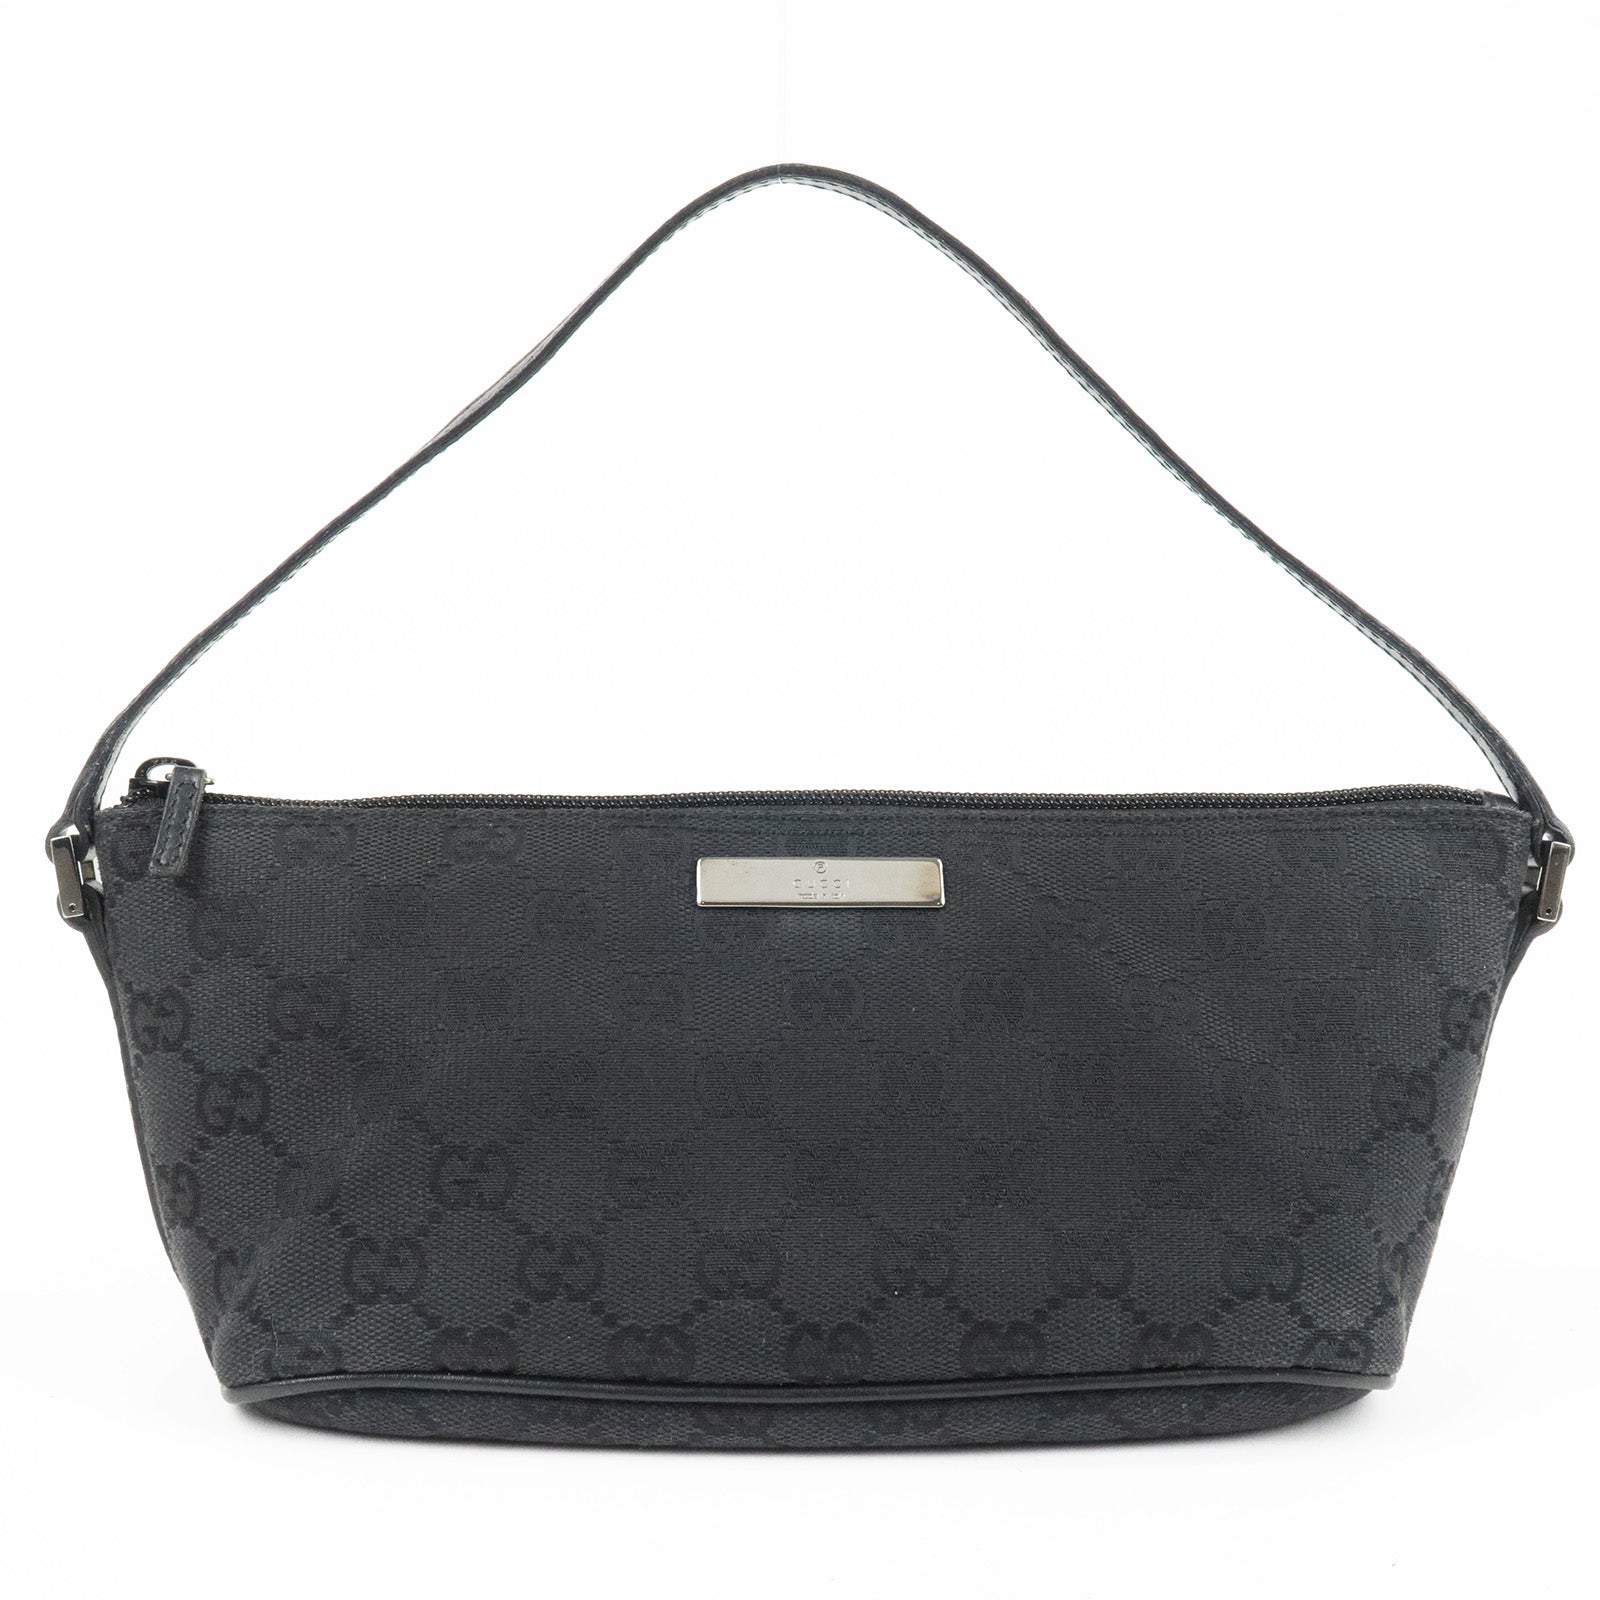 GUCCI-GG-Canvas-Leather-Boat-Bag-Hand-Bag-Black-07198 – dct